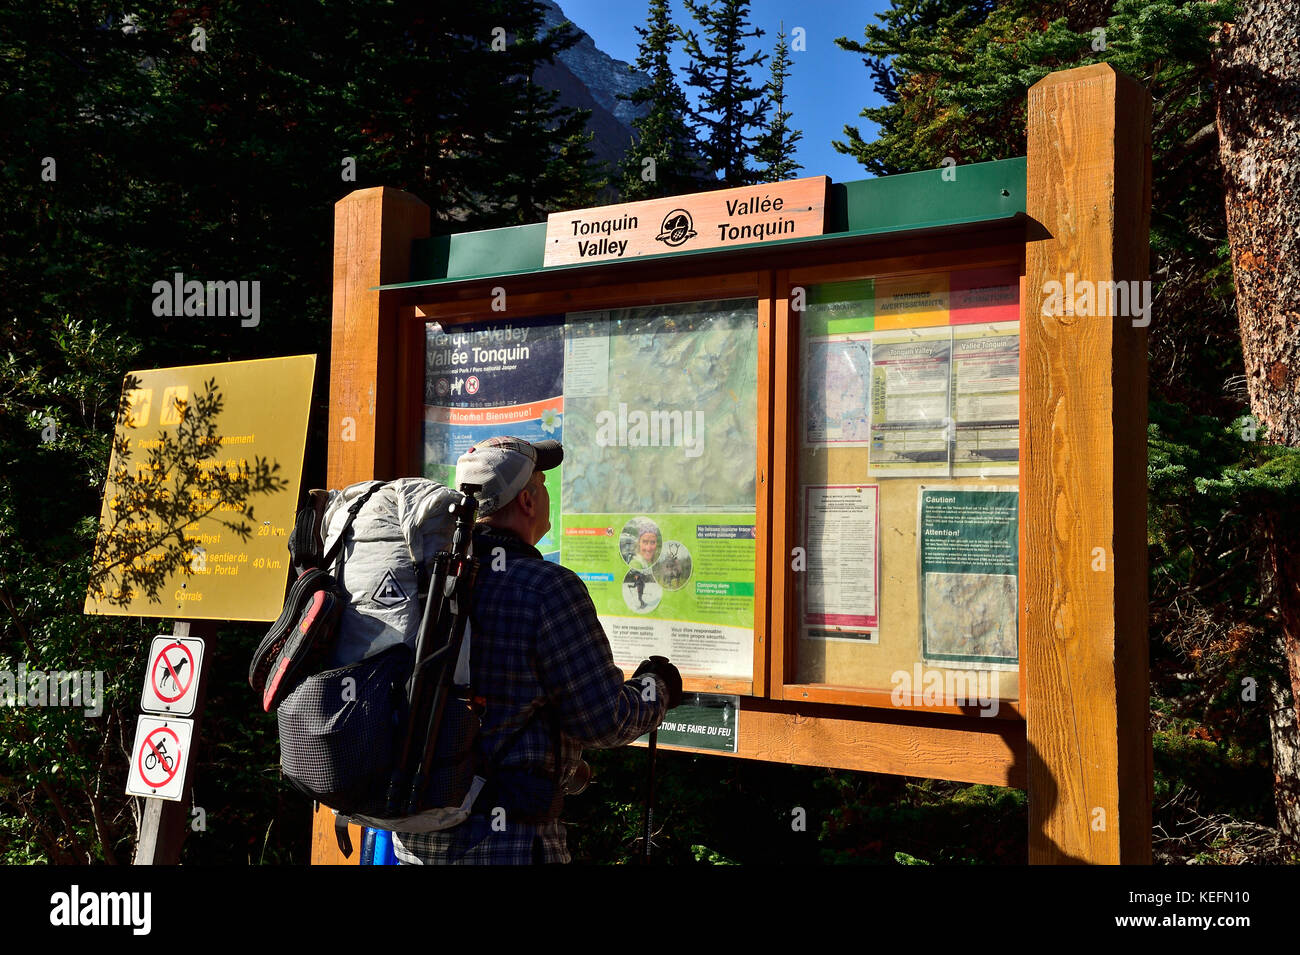 An adult male hiker checking the information map before starting on a hike to the remote Tonquin Valley in Jasper National Park, Alberta, Canada. Stock Photo